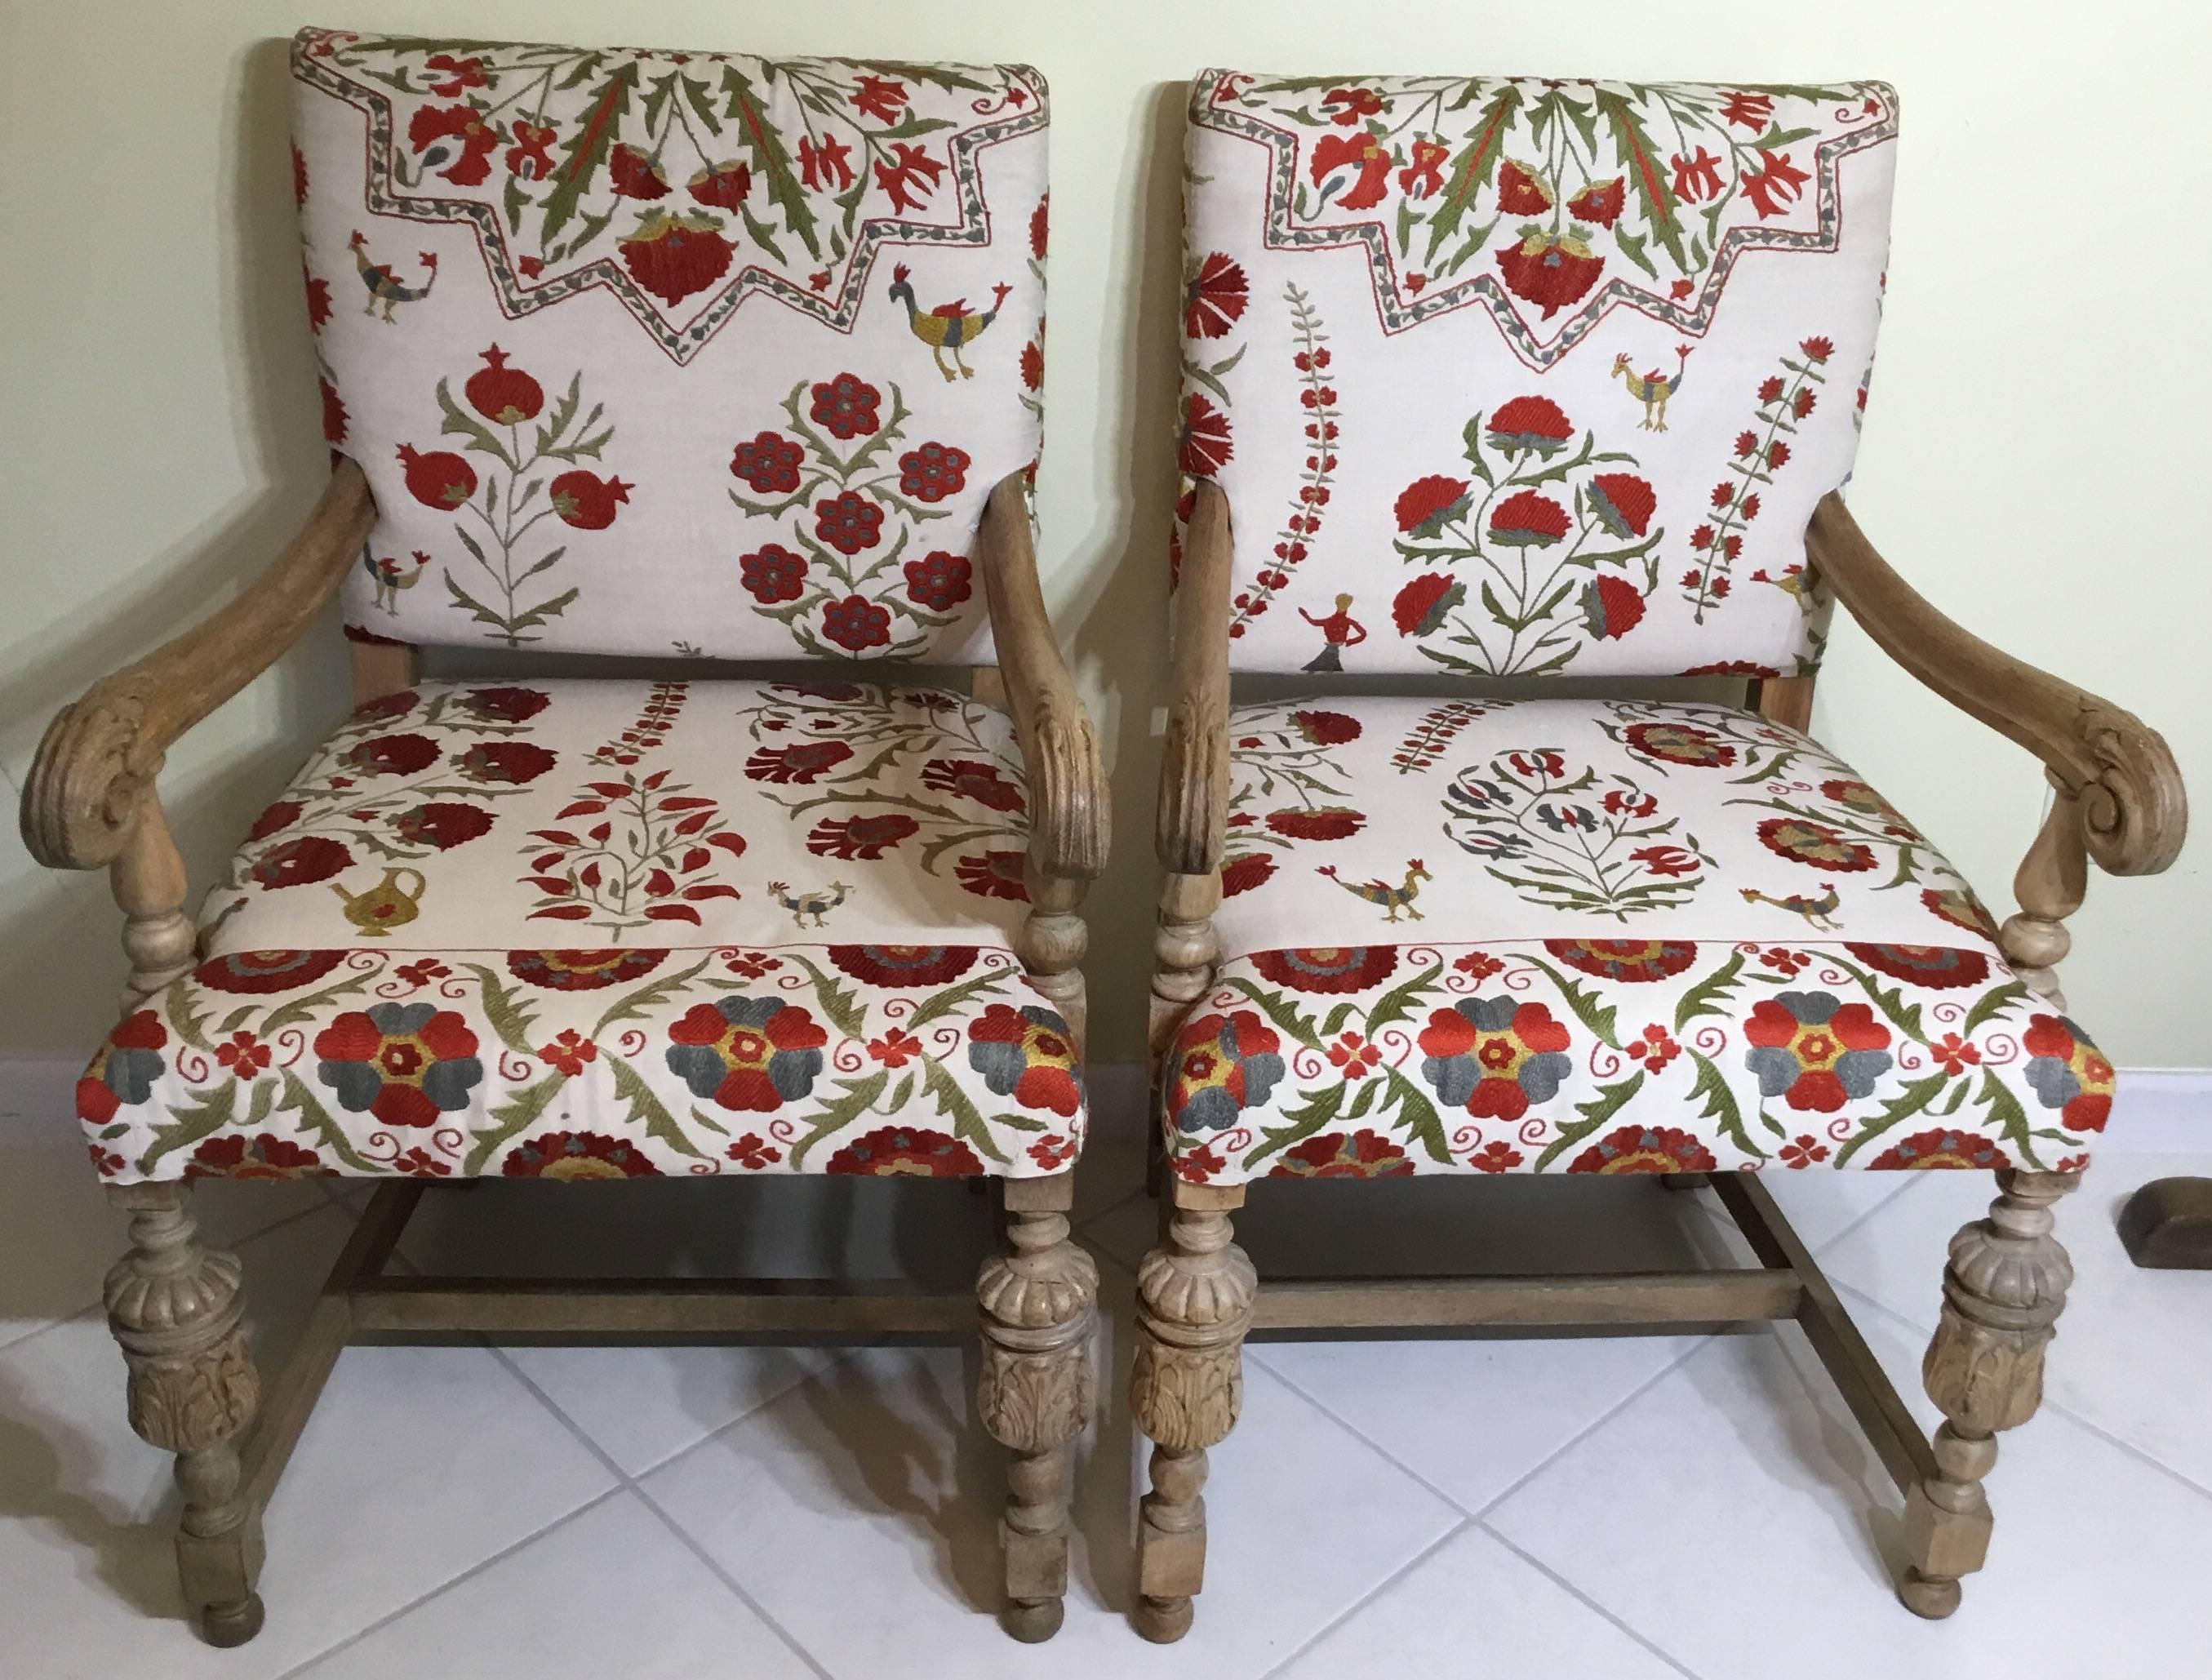 Exceptional pair of antique light wood hand-carved armchier, all covered with 
Beautiful Suzani textile, hand embroidery silk on cream color background.
Floral, vines and birds motifs.
One of a kind will look great in any room, a conversation